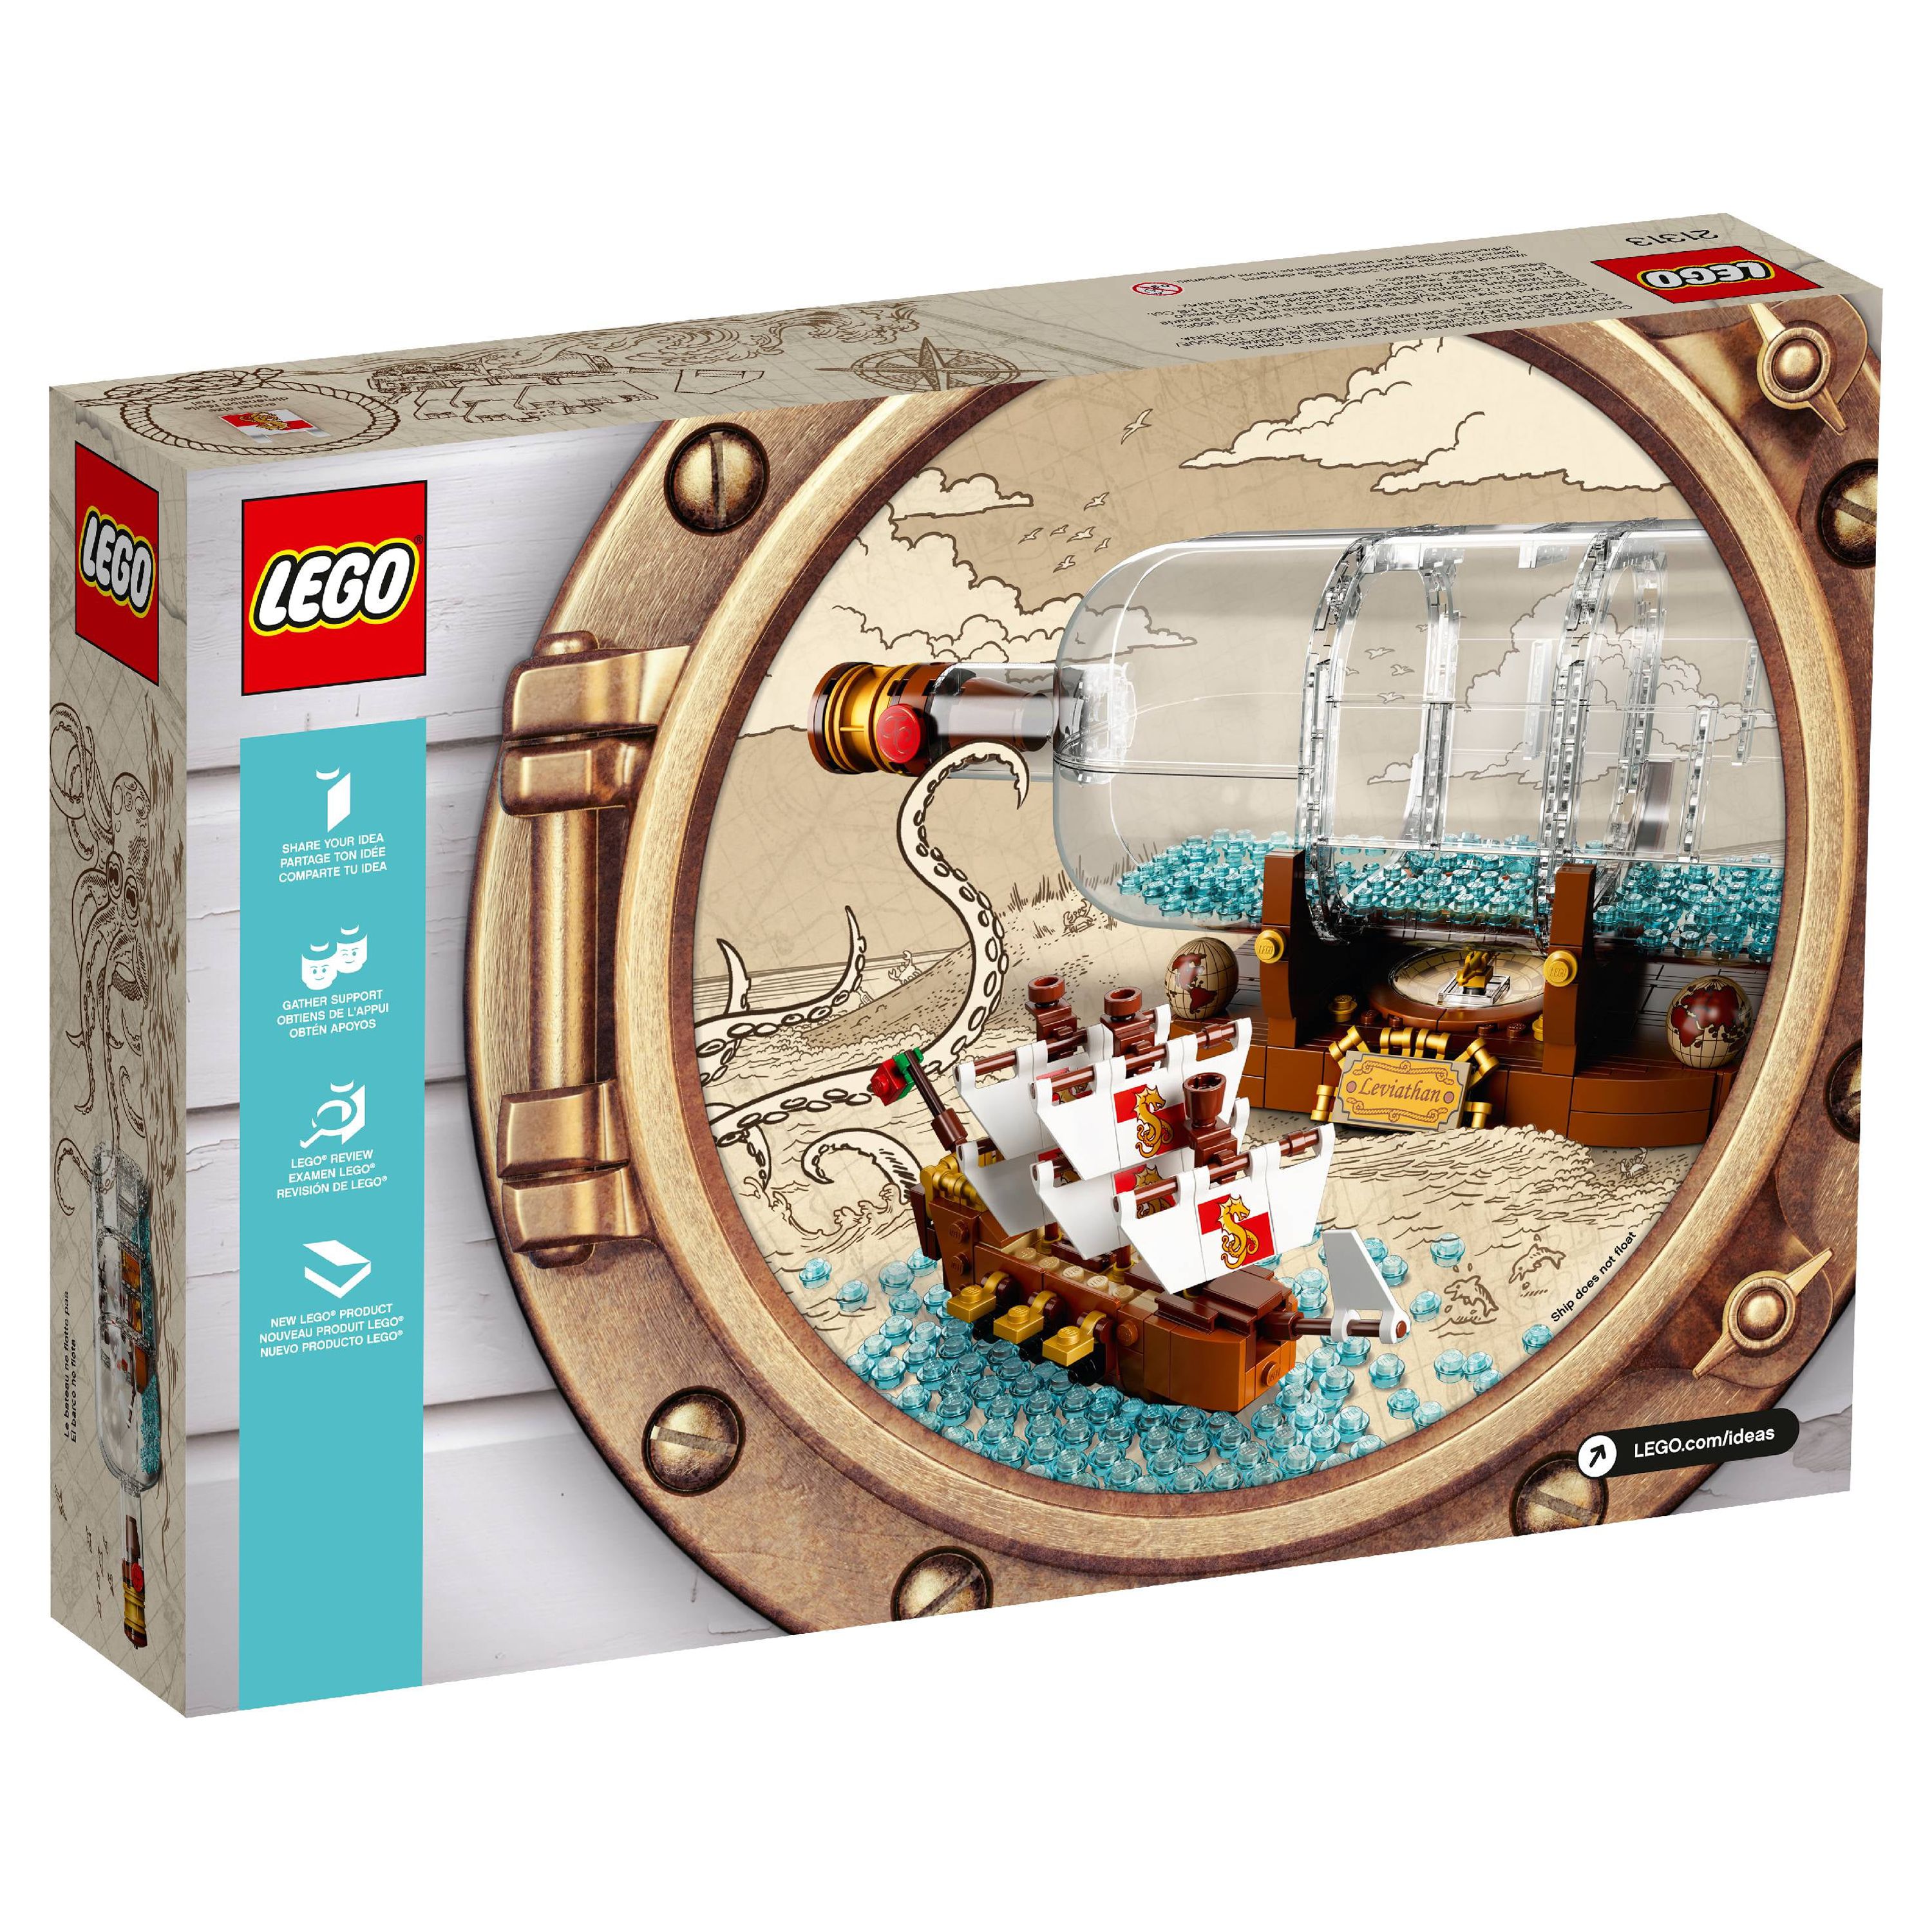 LEGO Ideas Ship in a Bottle&nbsp;21313 - image 4 of 6